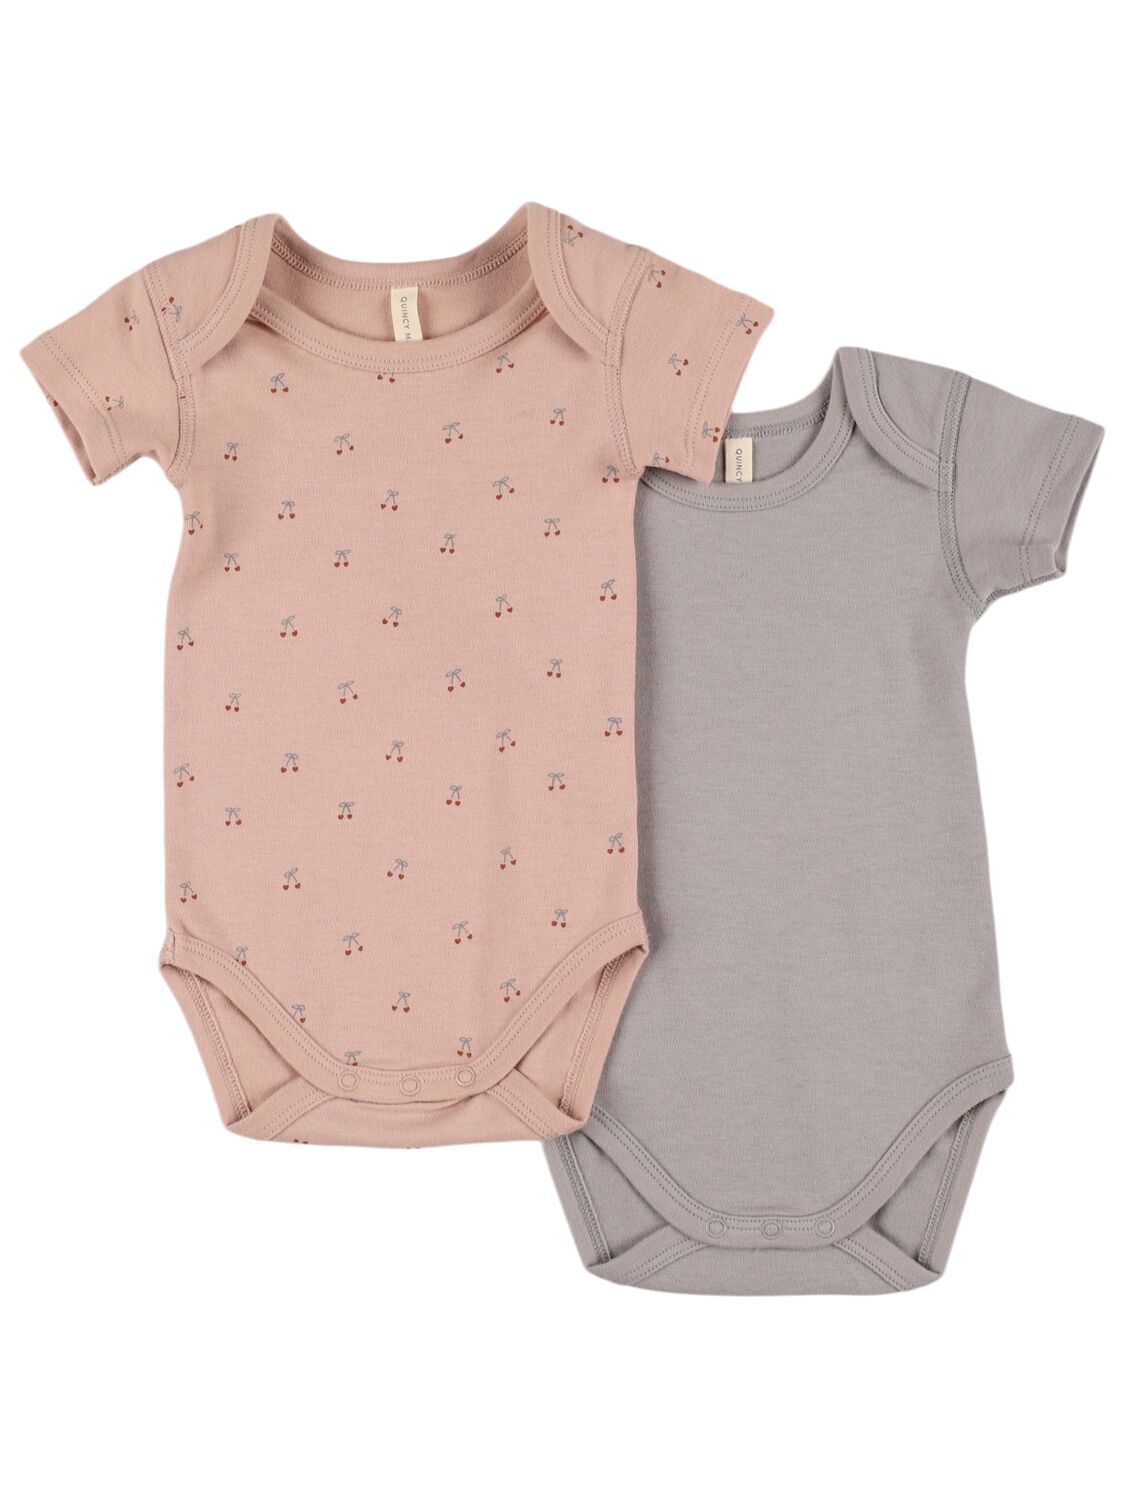 Quincy Mae Babies' Set Of 2 Organic Cotton Bodysuits In Multicolor